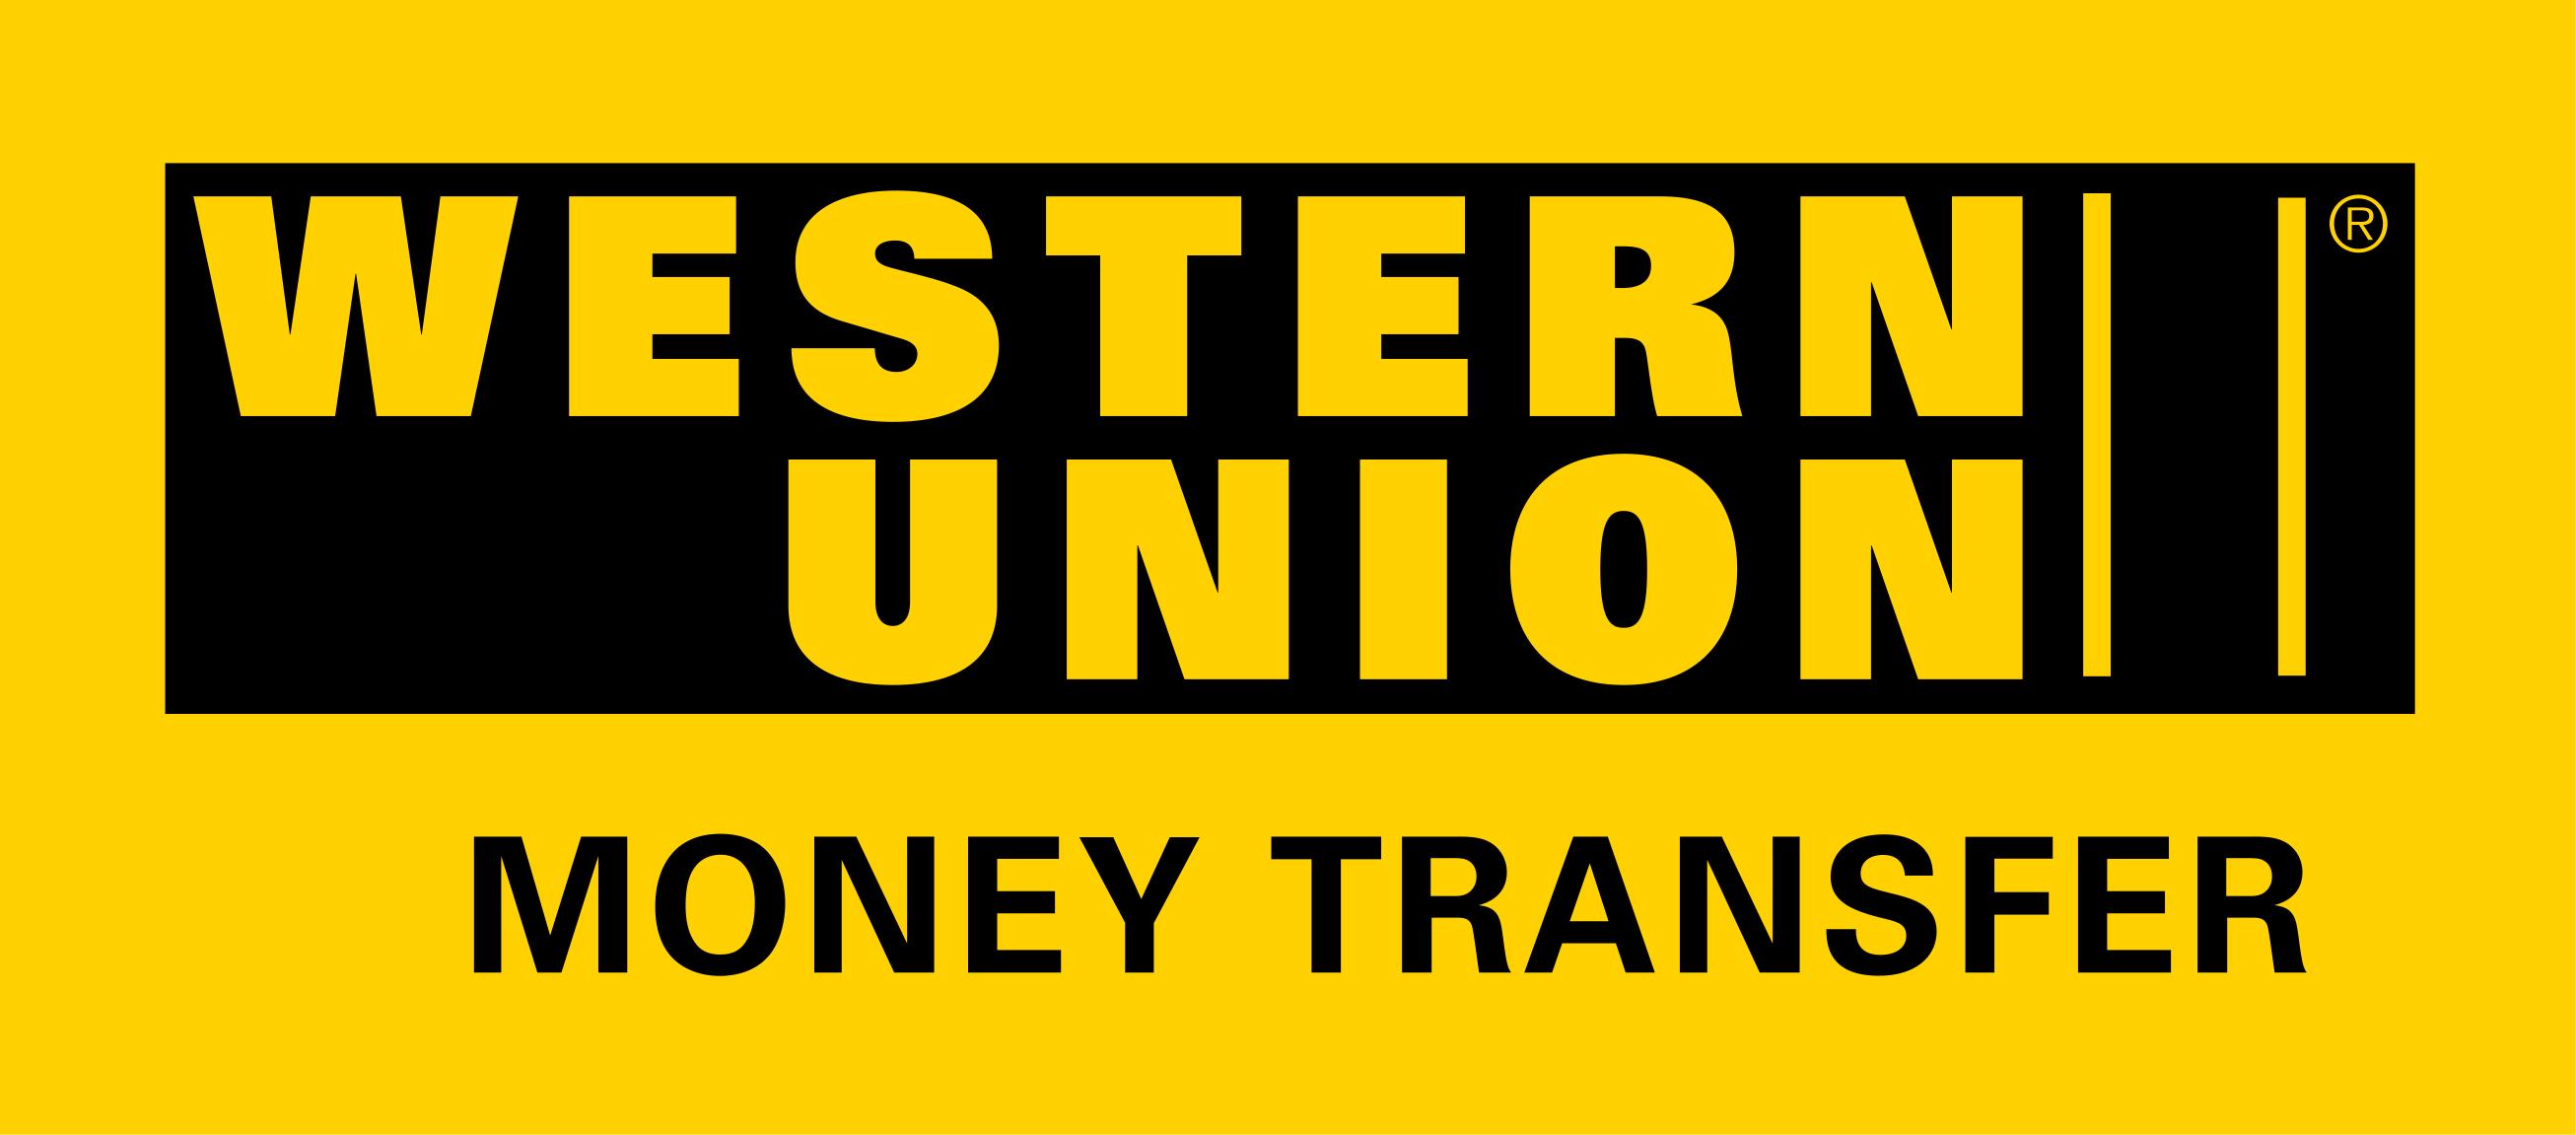 Brysons Money Transfer Services - Agents of Western Union